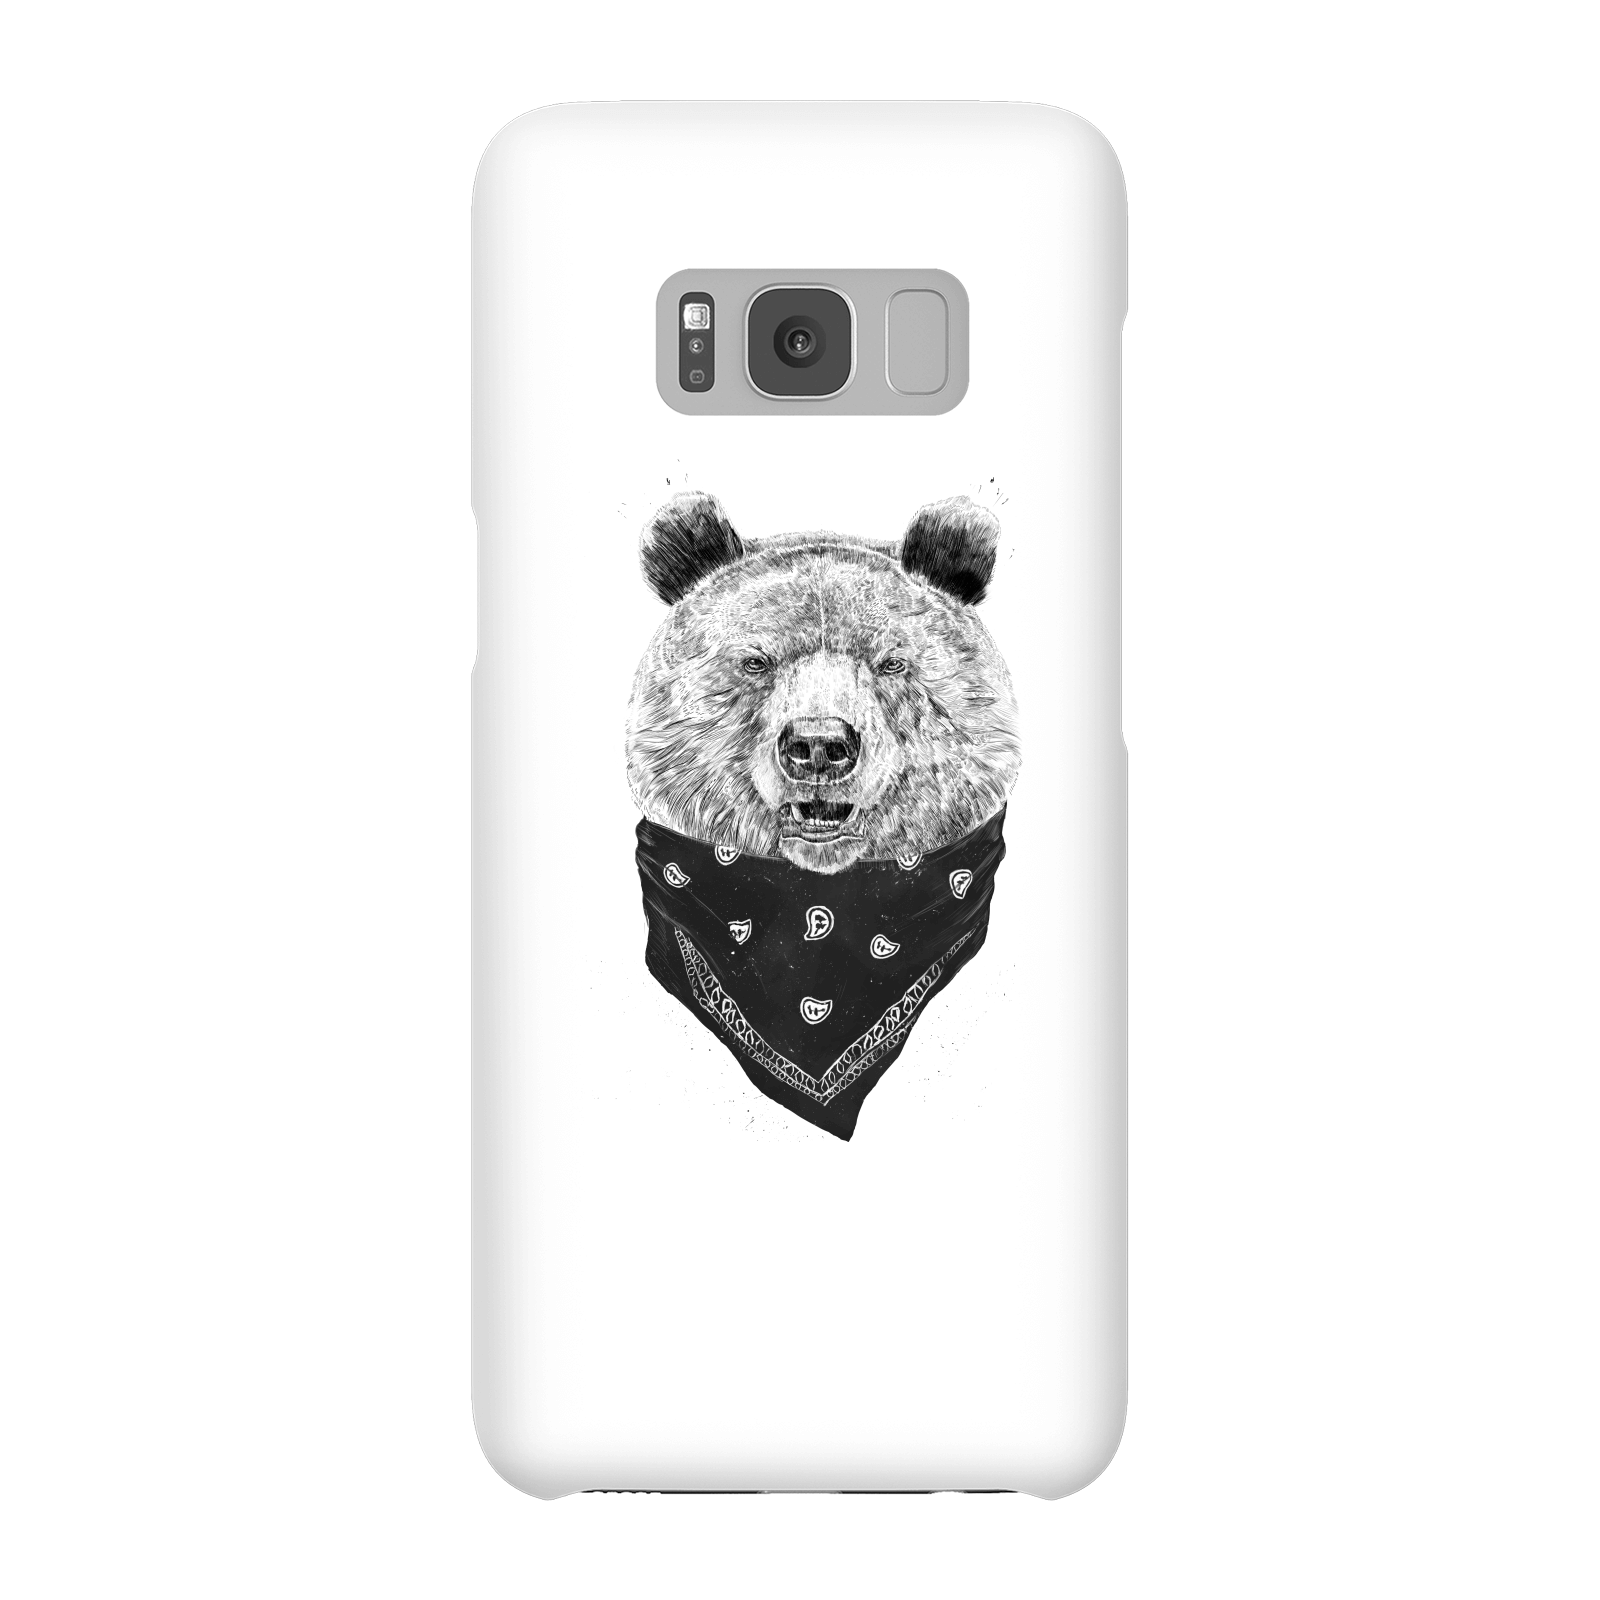 balazs solti bandana panda phone case for iphone and android - samsung s8 - snap case - gloss